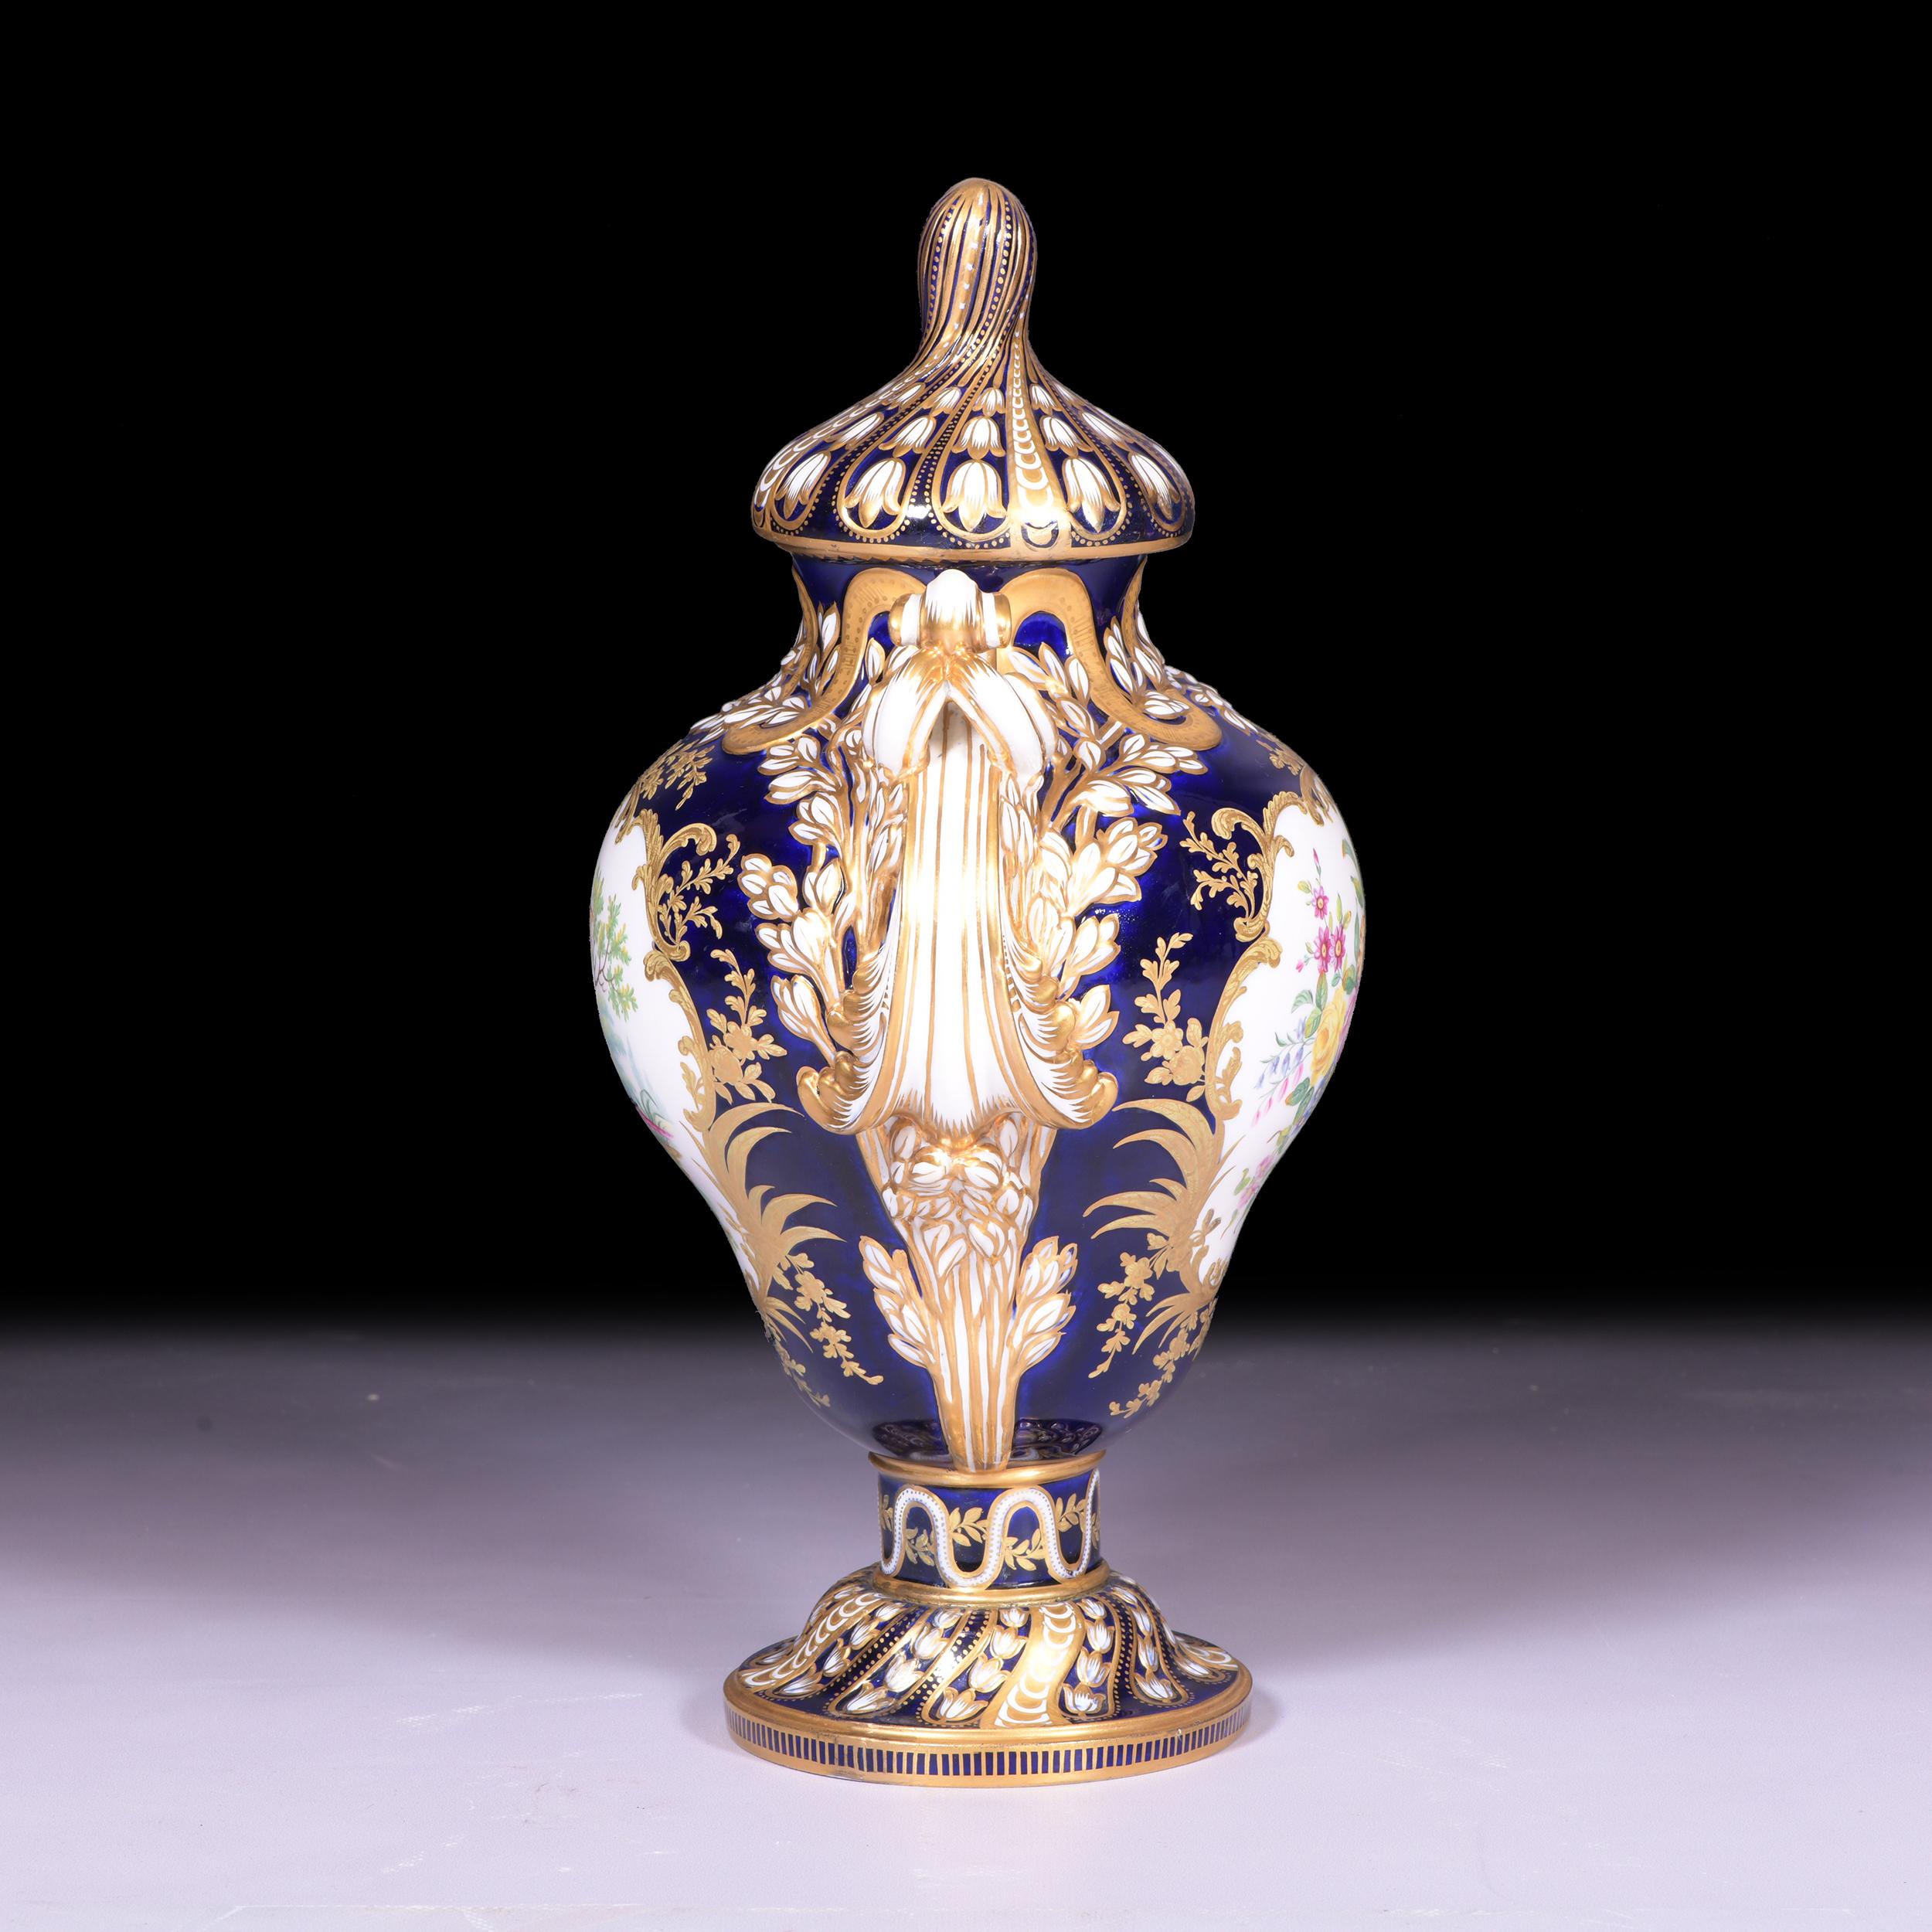 Victorian 19th Century English Exhibition Porcelain Vase by Minton Painted by Martin Sneed For Sale